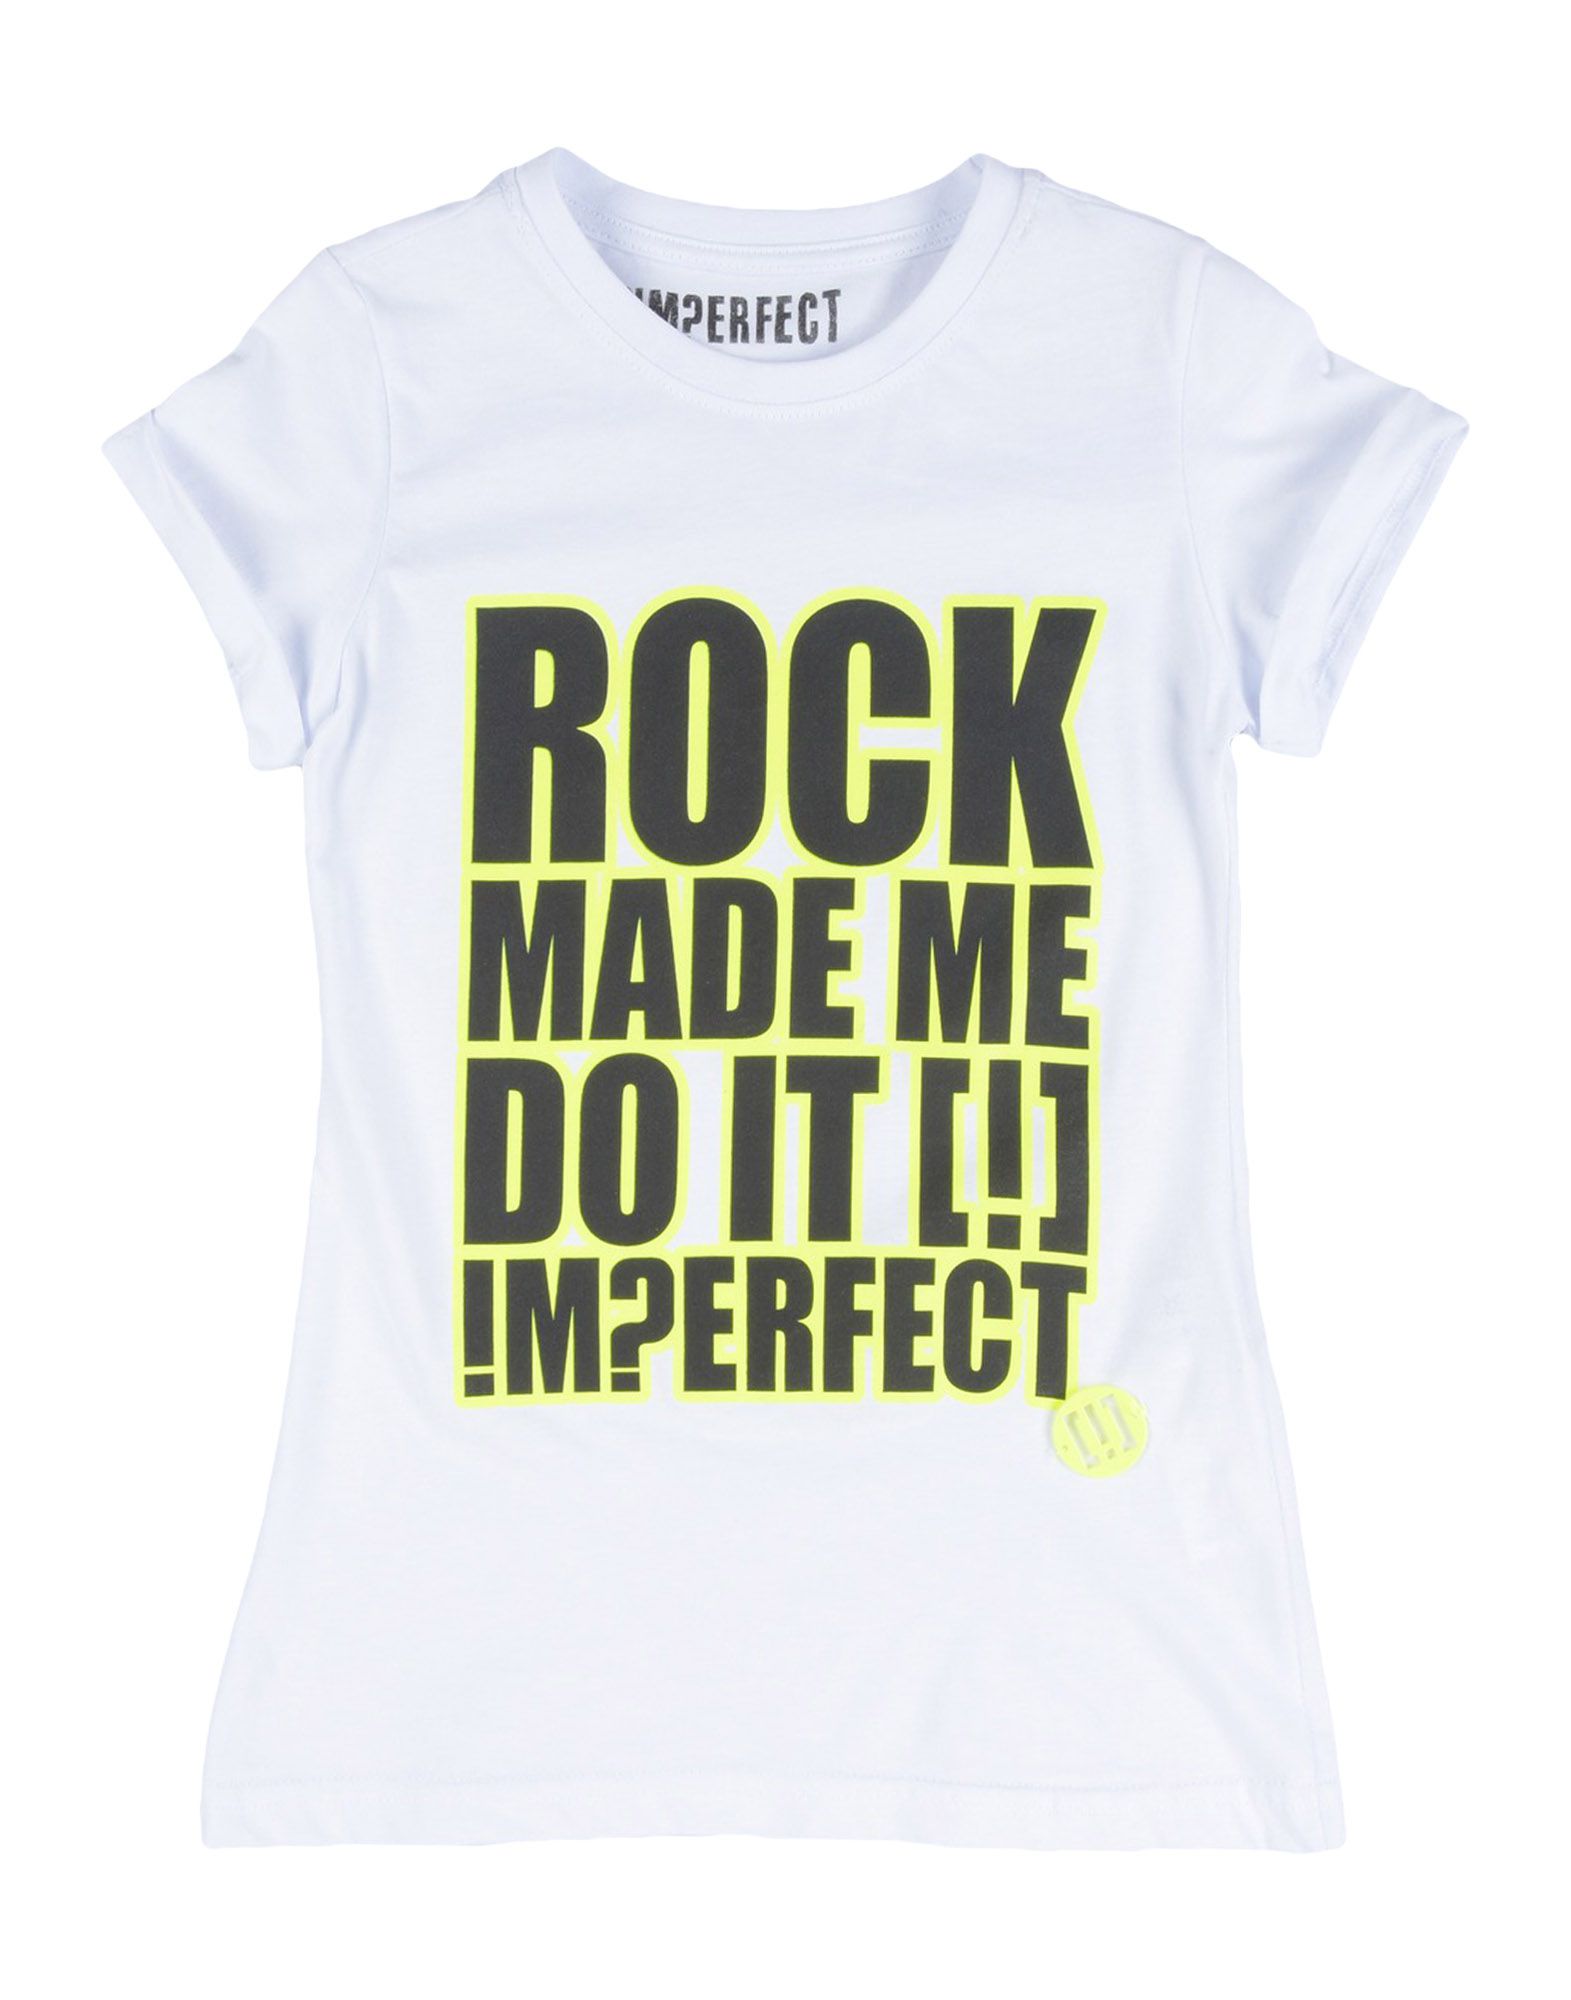 !m?erfect Kids'  T-shirts In White